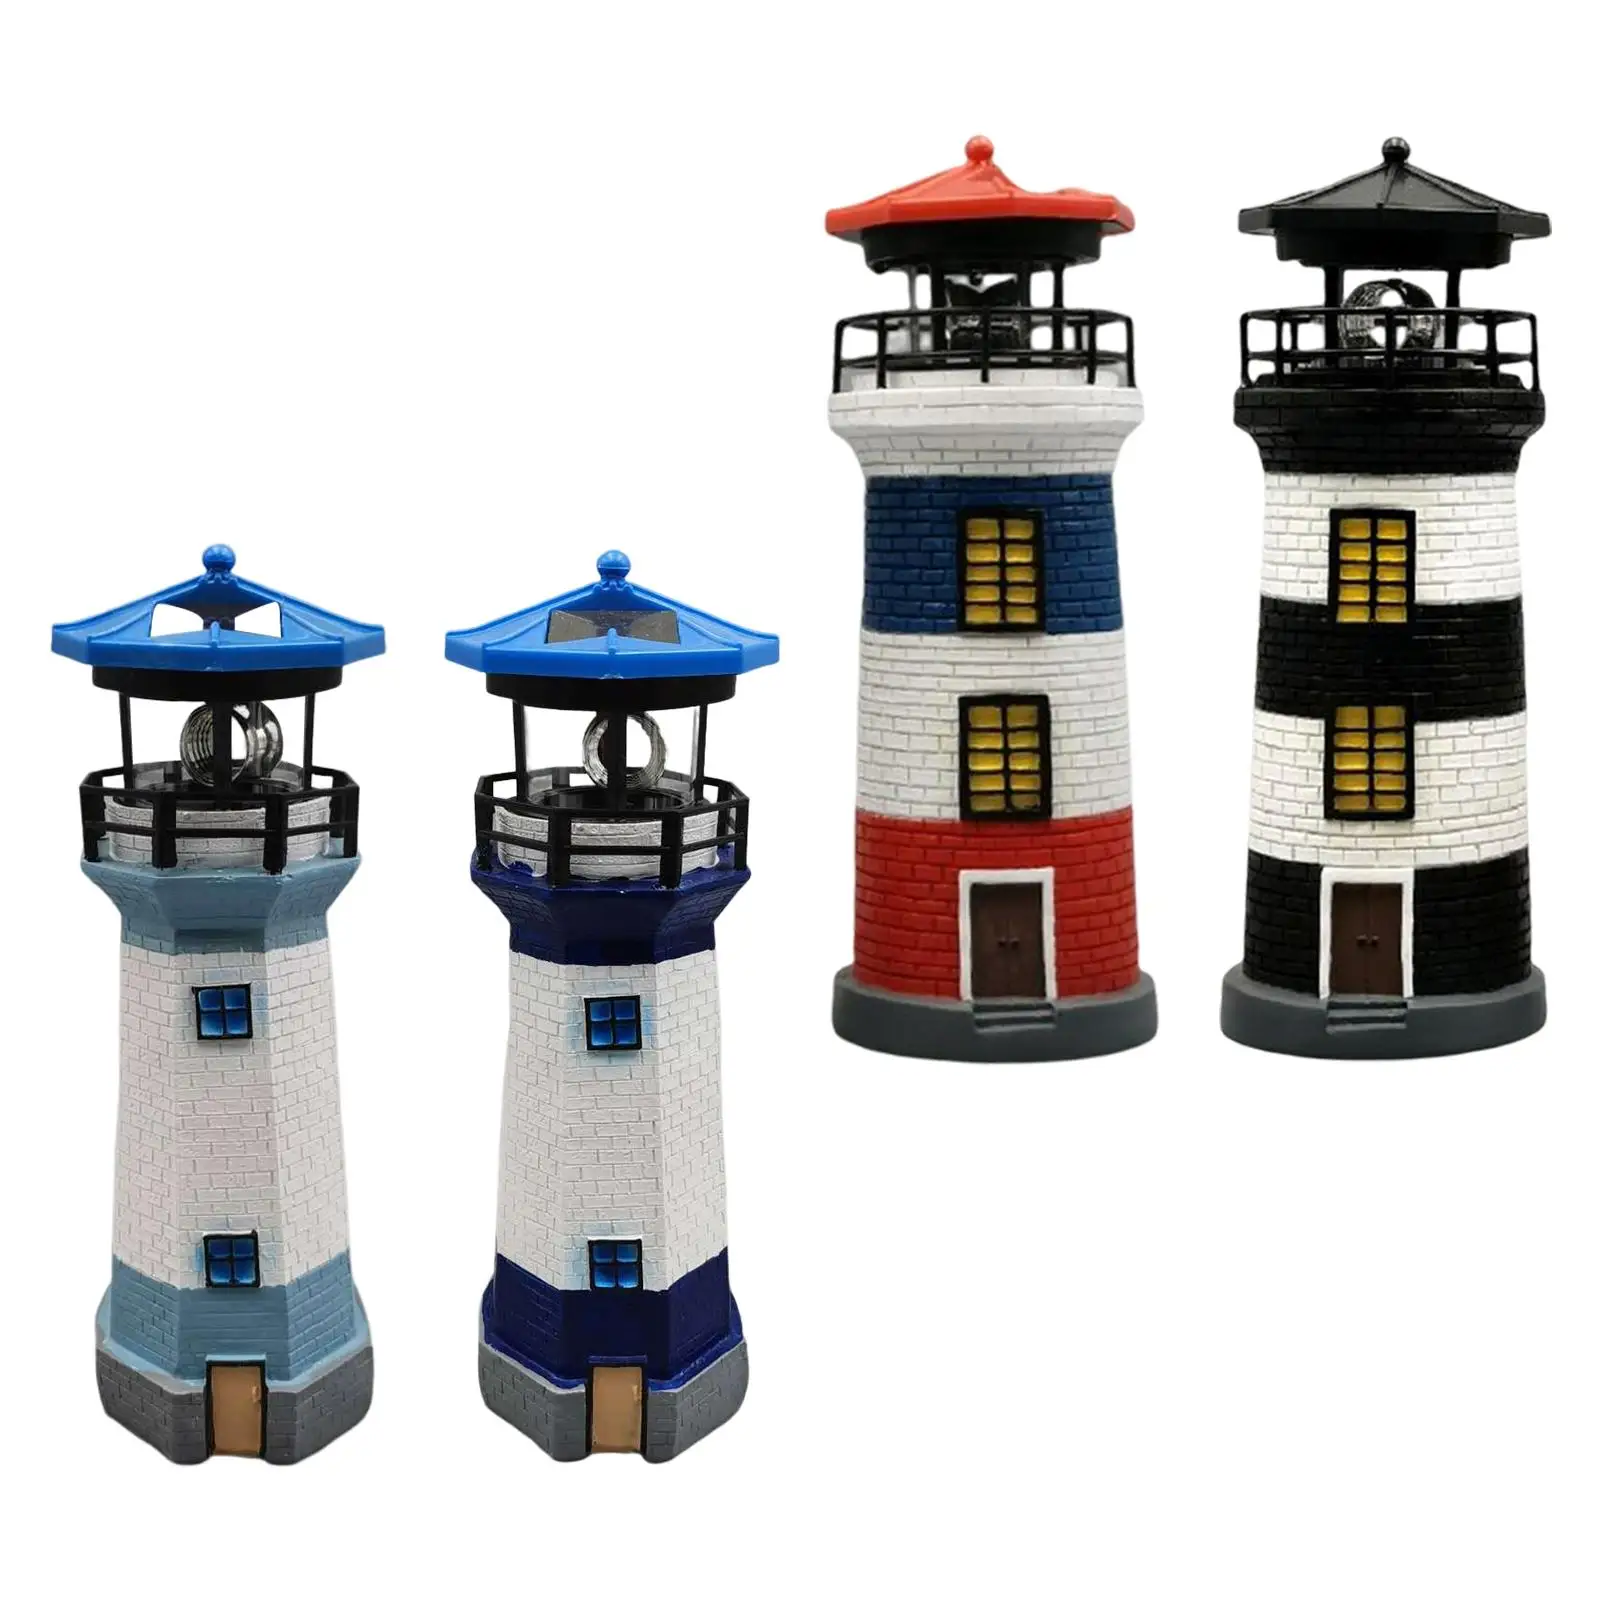 360 Degree Rotating solar Lighthouse Decoration Landscape Lamp Bright Premium for Outdoor Balcony Gift Lawn